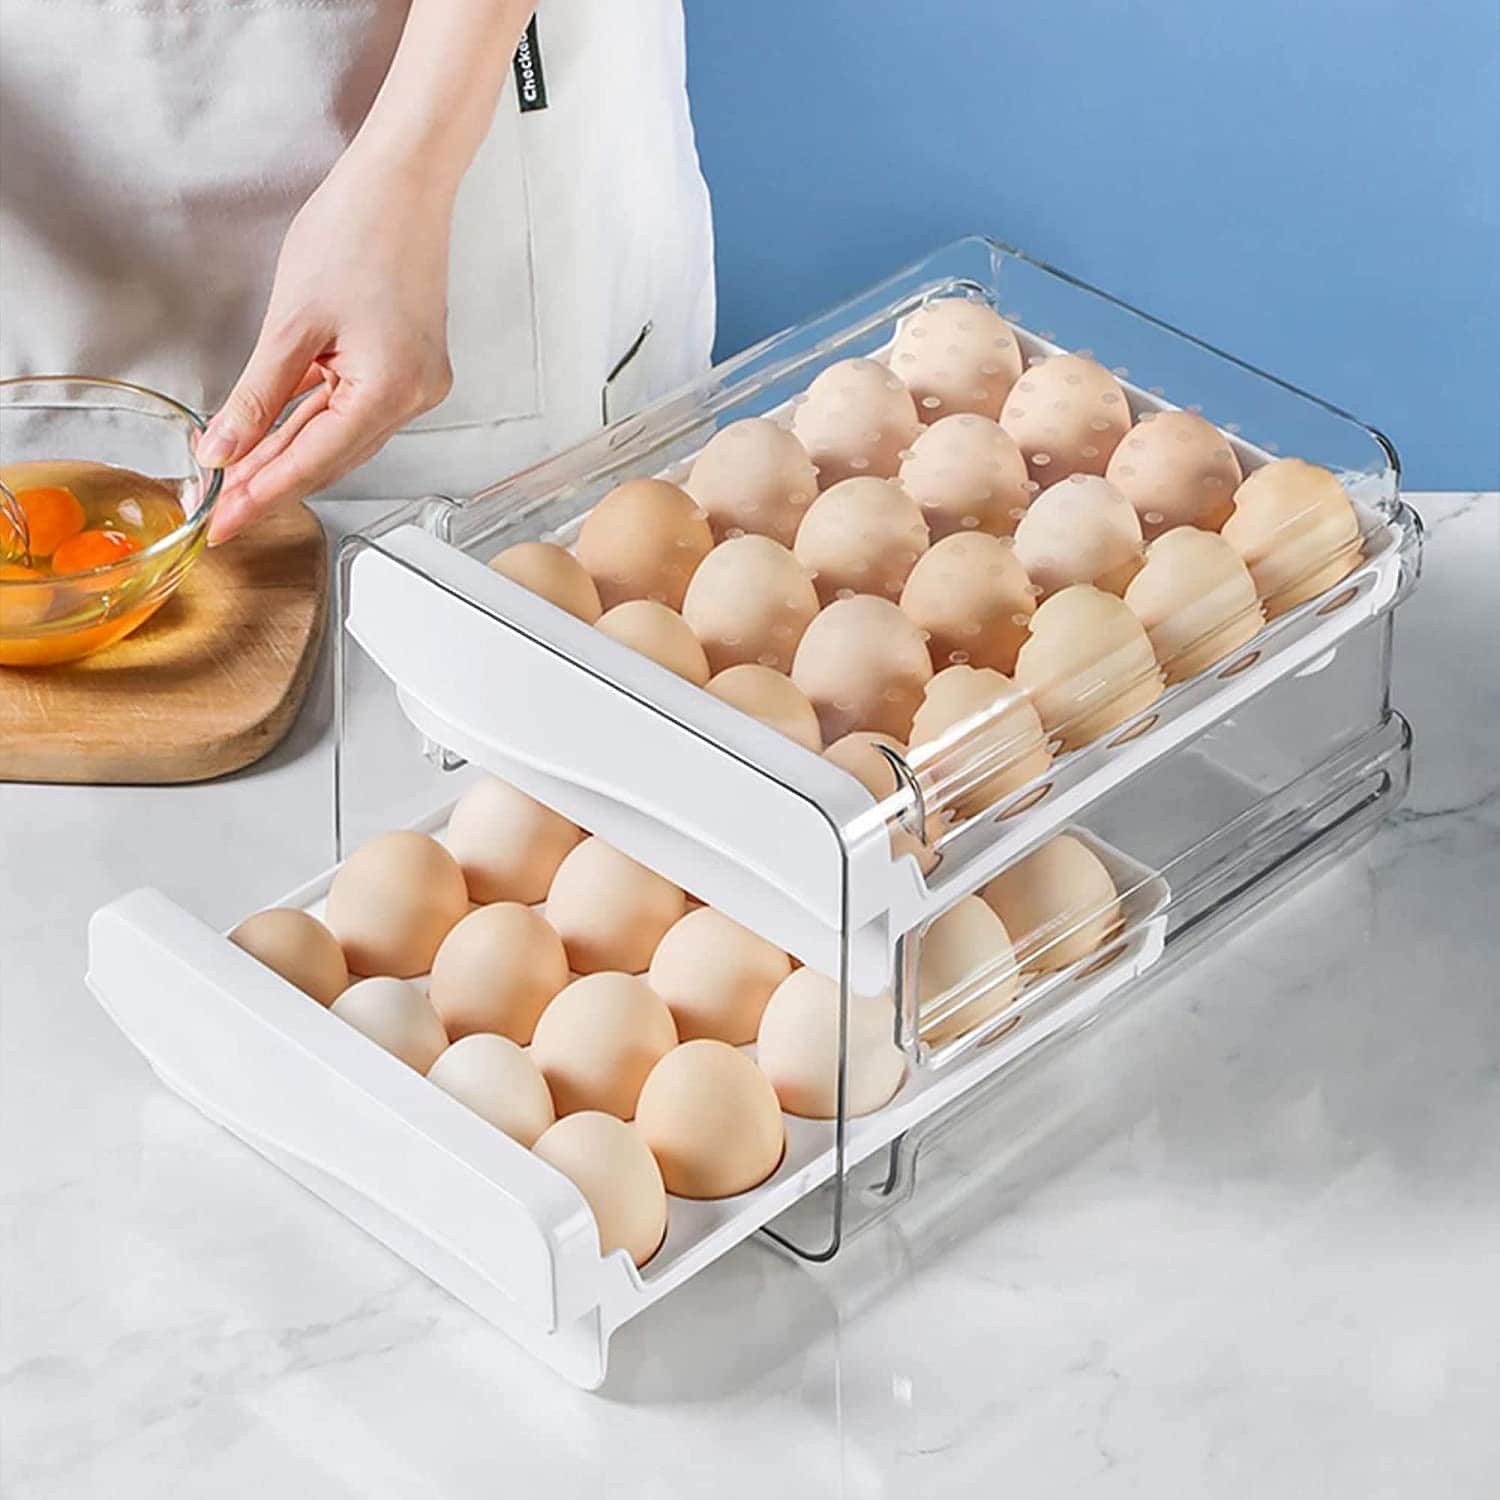 https://ak1.ostkcdn.com/images/products/is/images/direct/75bfabd559d832123e91e0452c167834e29fdcc4/Kitchen-Plastic-Egg-Holder%2CFridge-2-tier-Organizer-Container-with-Handles.jpg